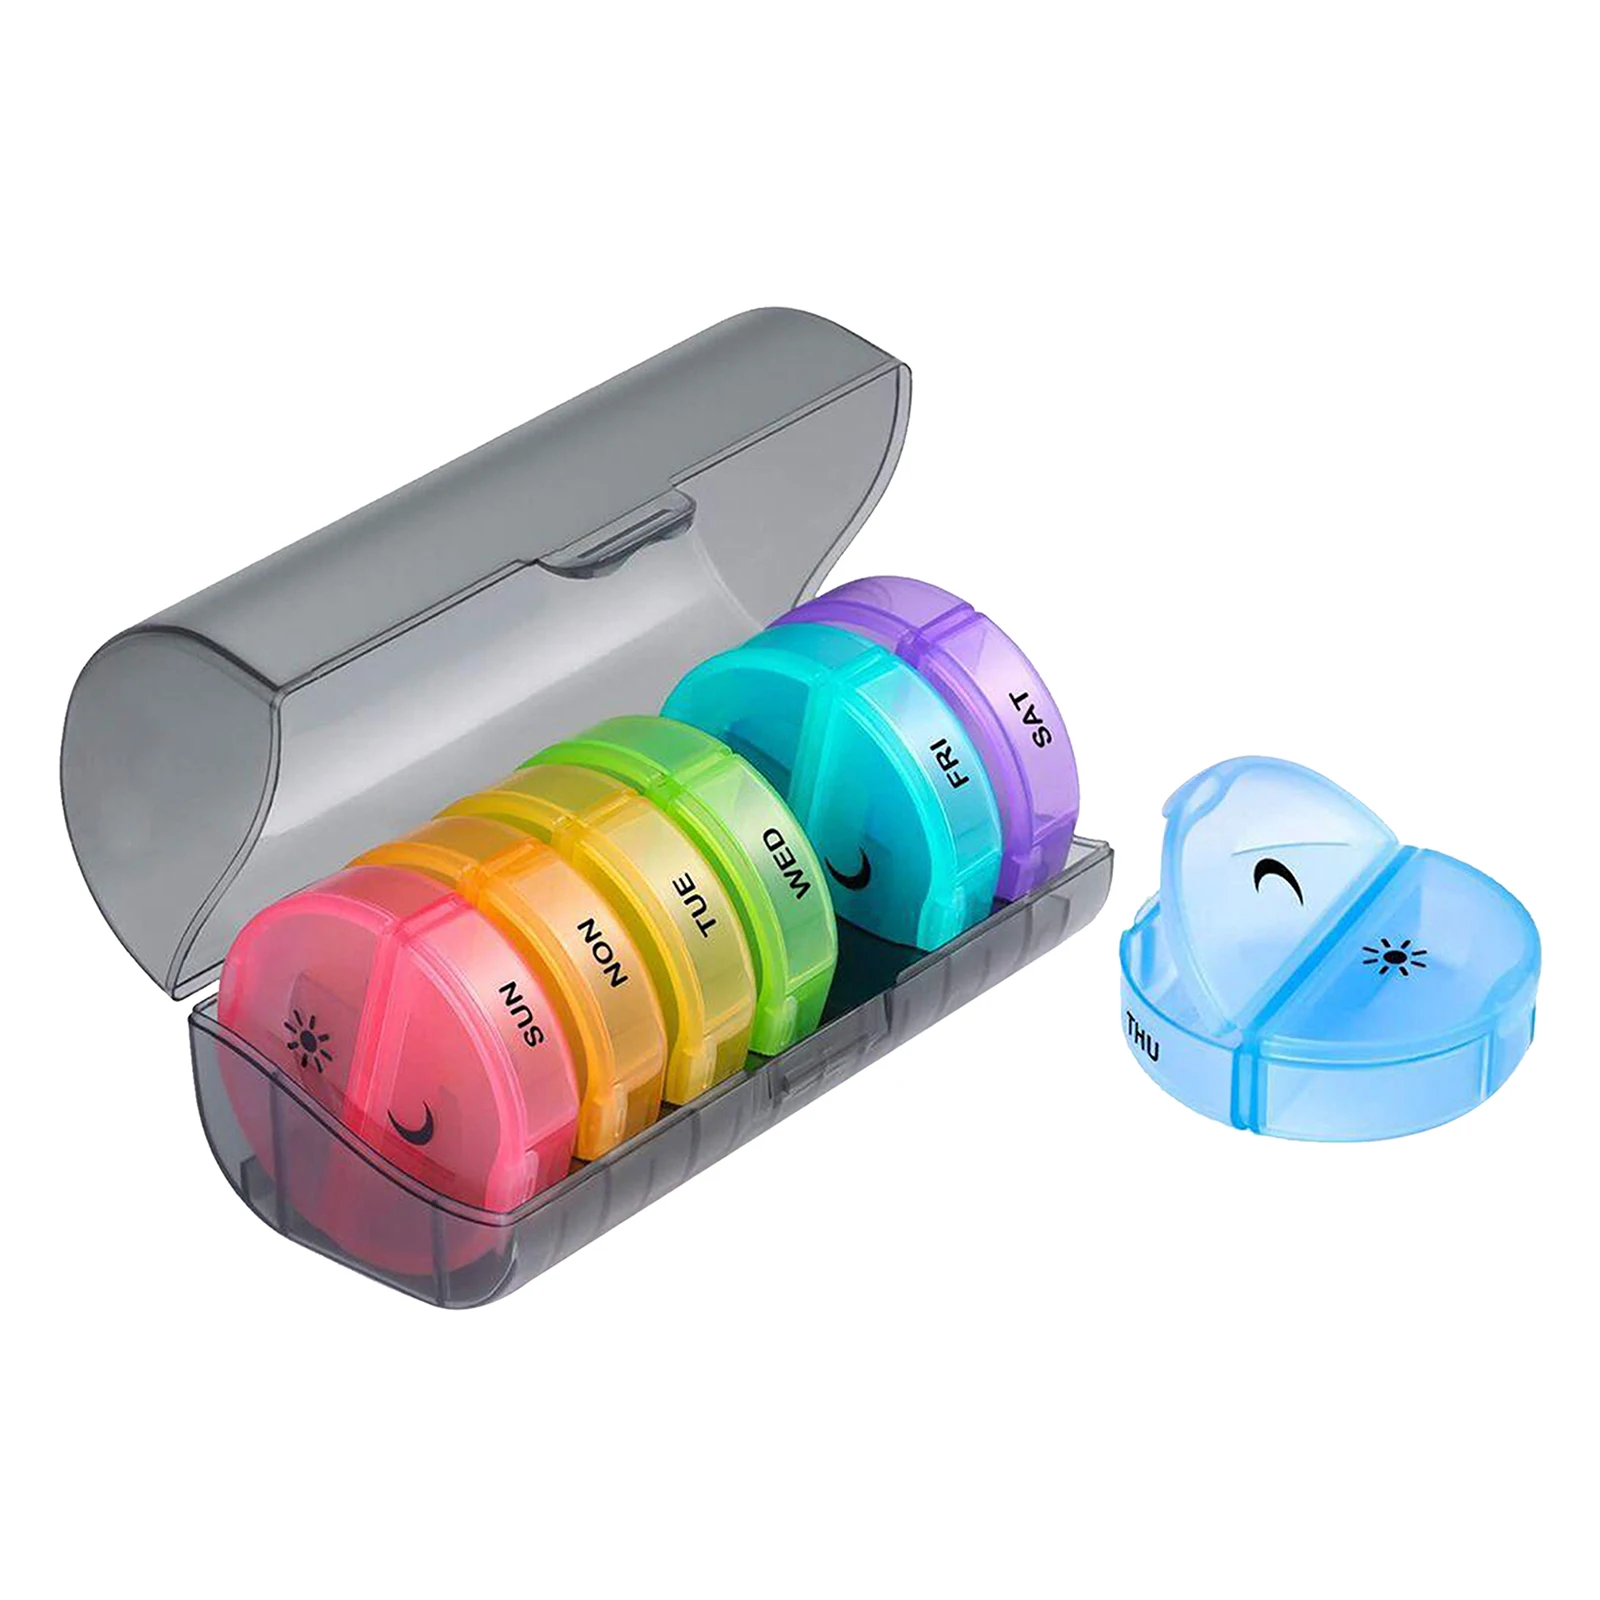 Weekly Pill Organizer 7 Day 2 Times a Day Weekly AM / PM Pill Box for Pills